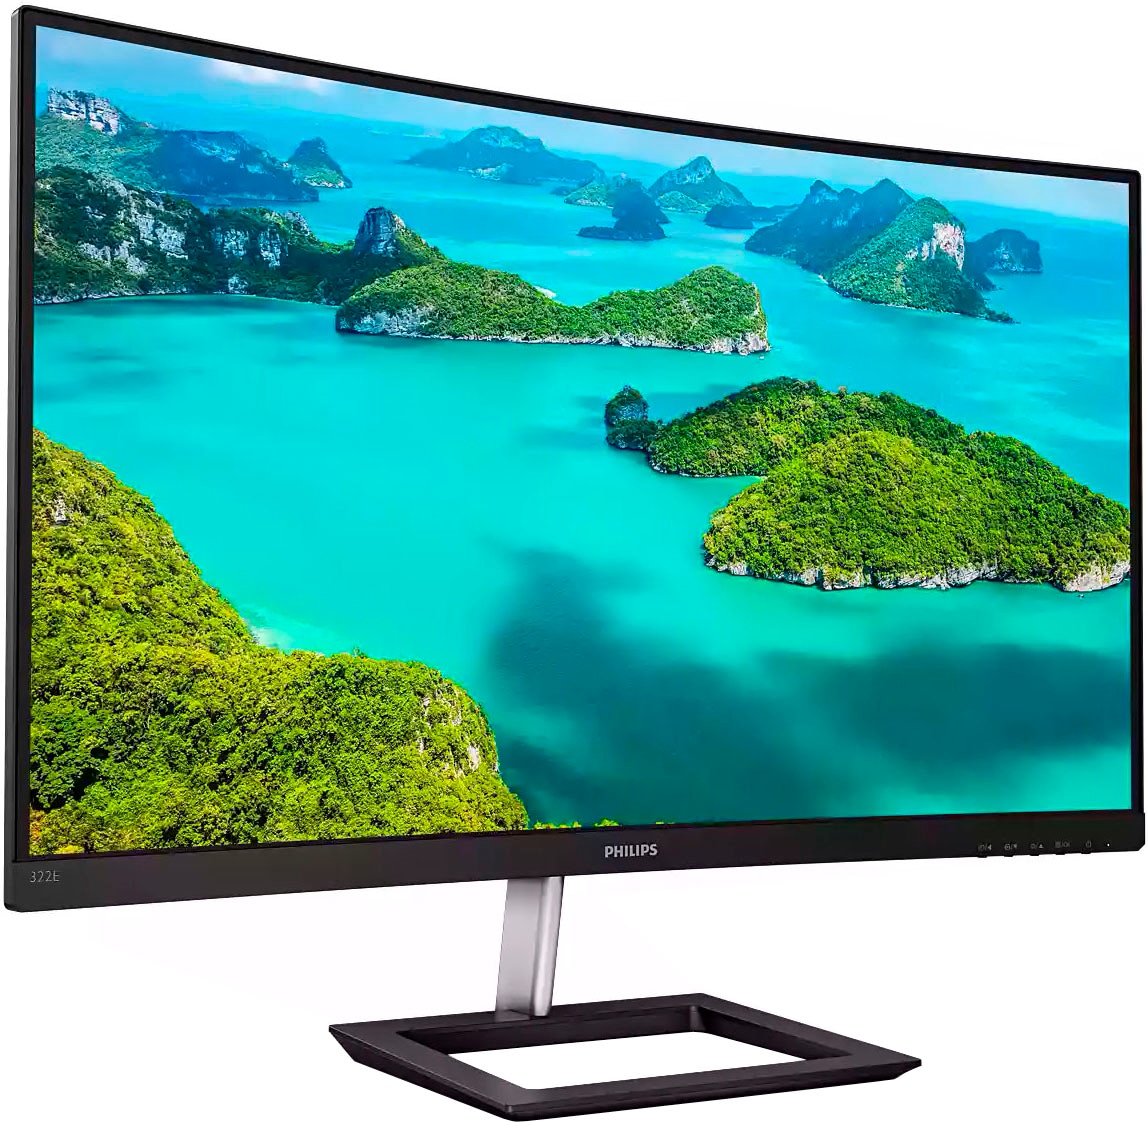 Philips LED-Monitor »322E1C/00«, 80 cm/31,5 Zoll, 1920 x 1080 px, Full HD, 4 ms Reaktionszeit, 75 Hz